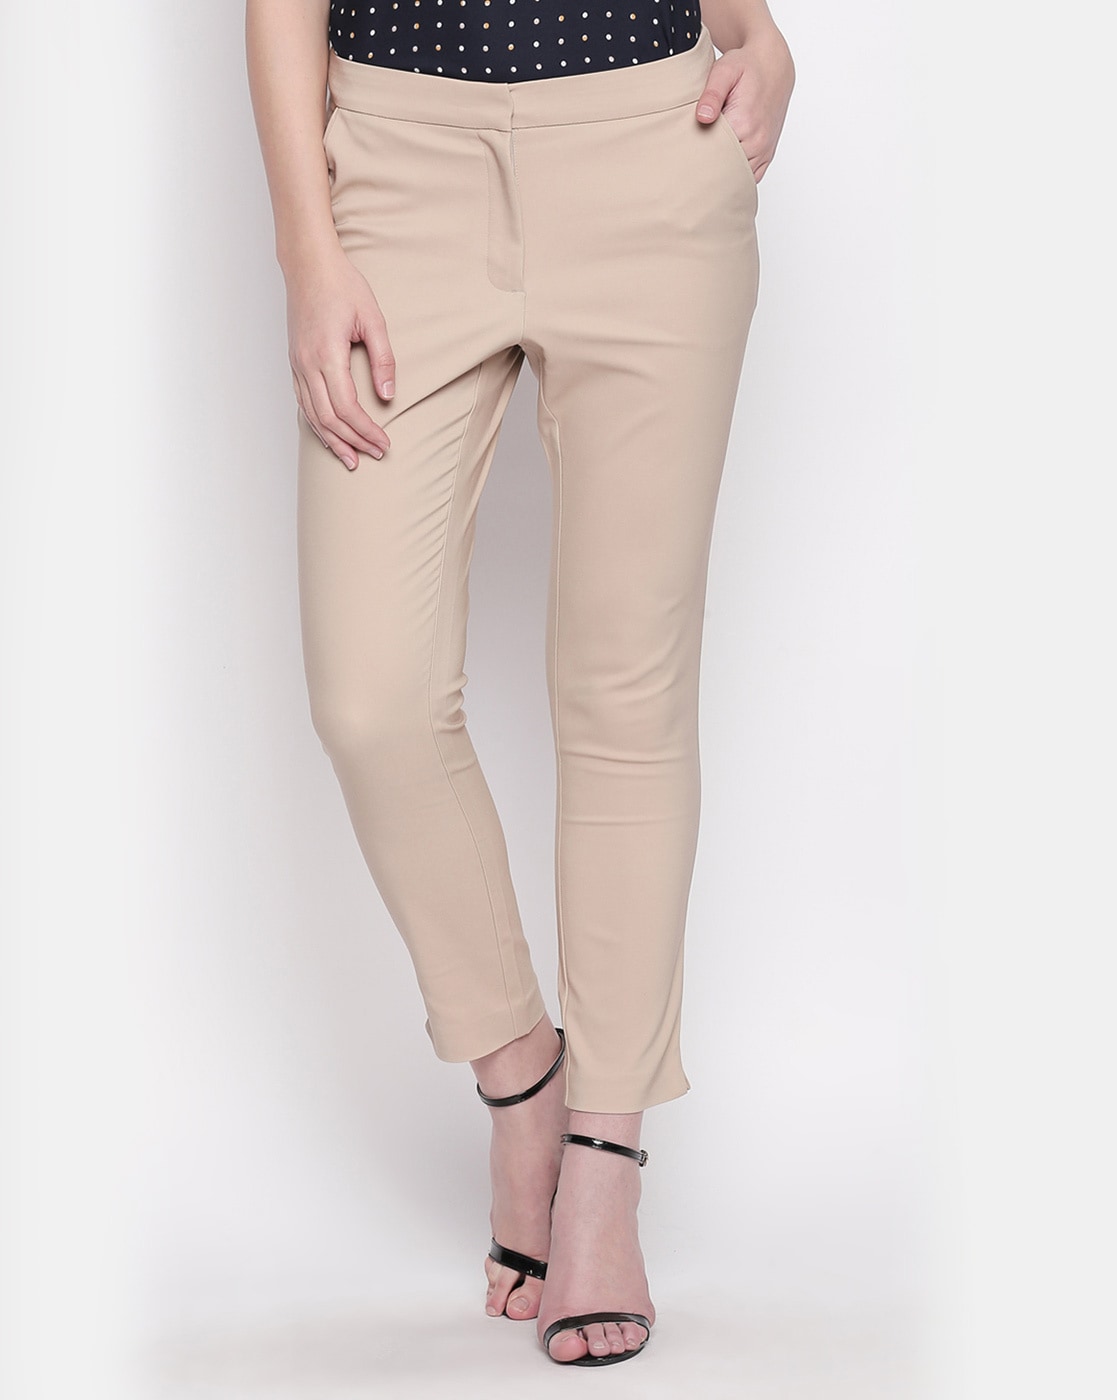 Buy Black Trousers & Pants for Women by Annabelle by Pantaloons Online |  Ajio.com